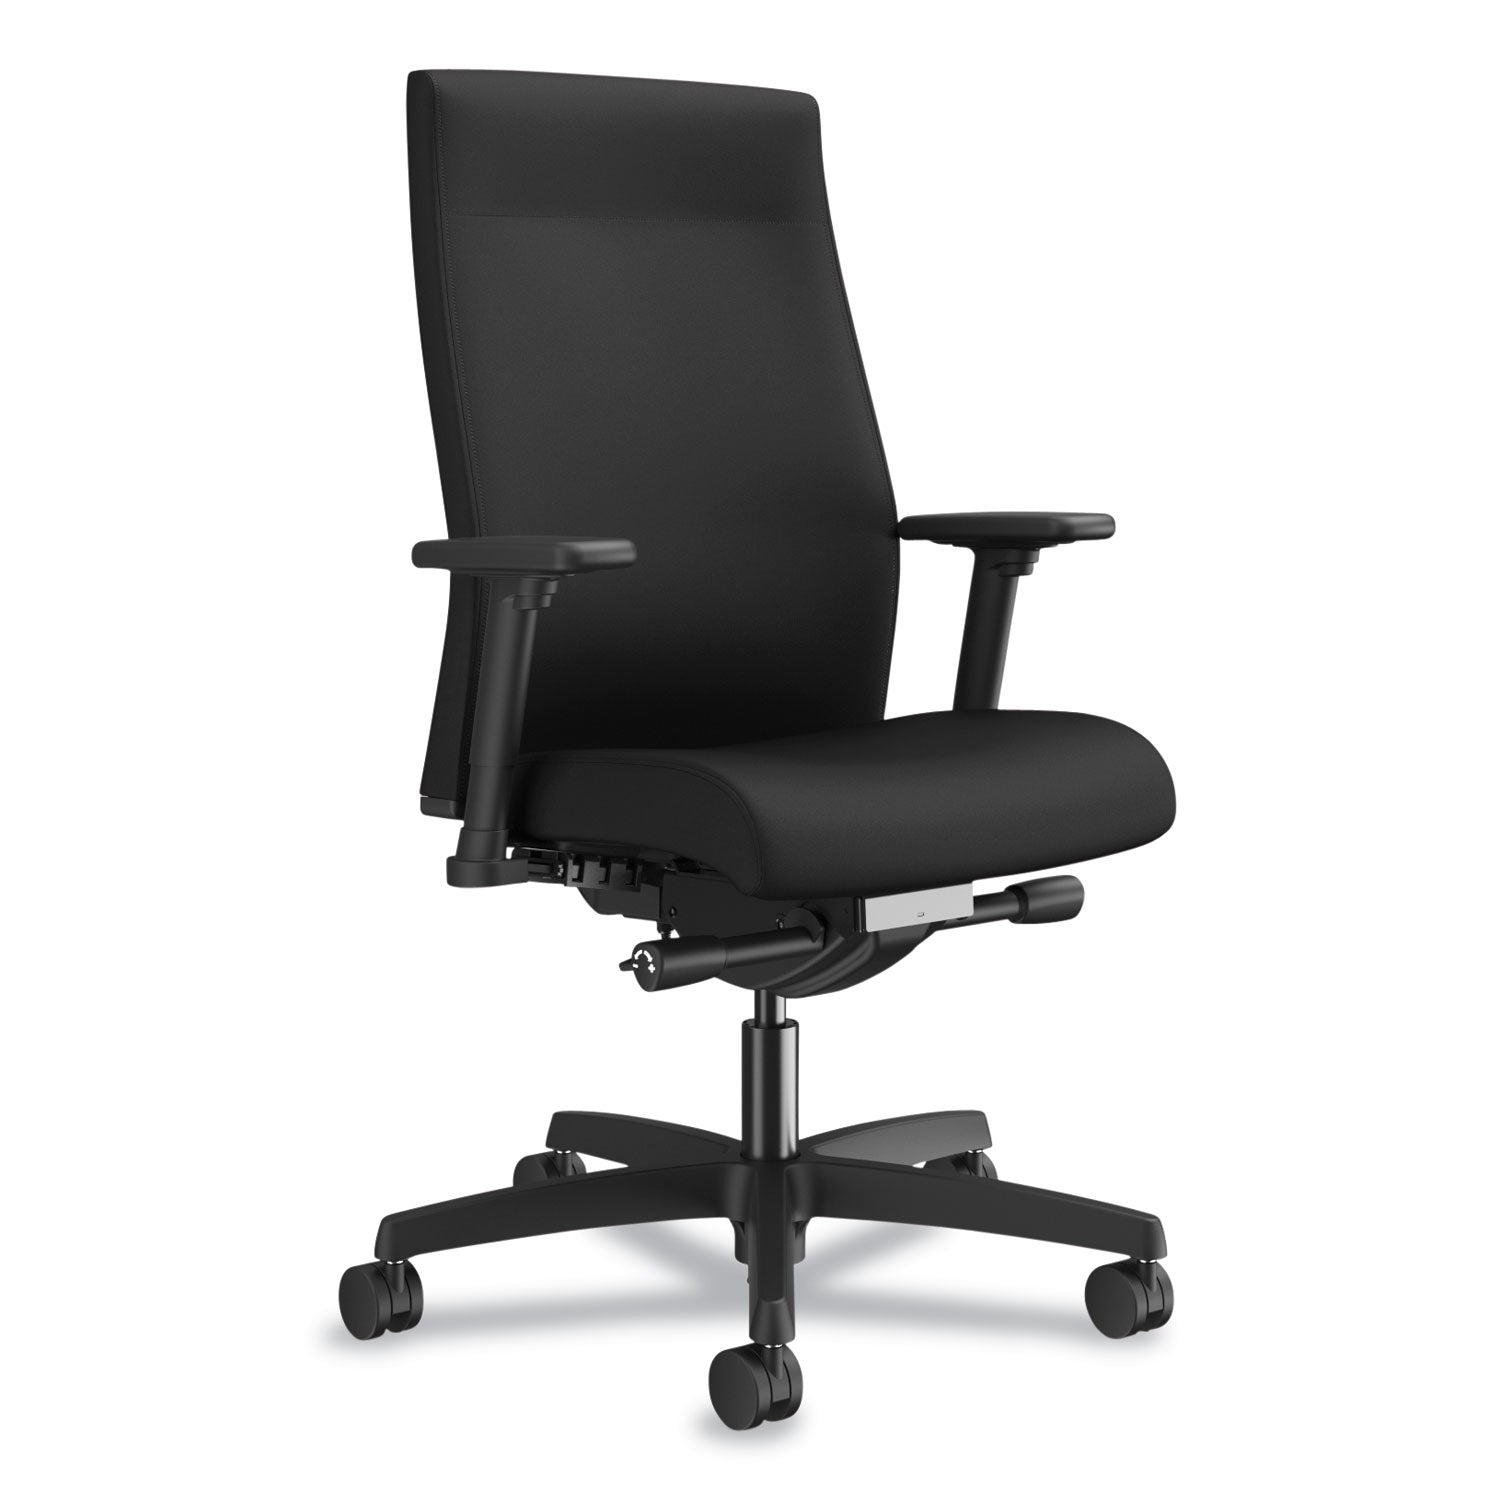 ignition-20-upholstered-mid-back-task-chair-with-lumbar-supports-up-to-300-lb-17-to-22-seat-height-black_honi2ul2ac10tk - 1